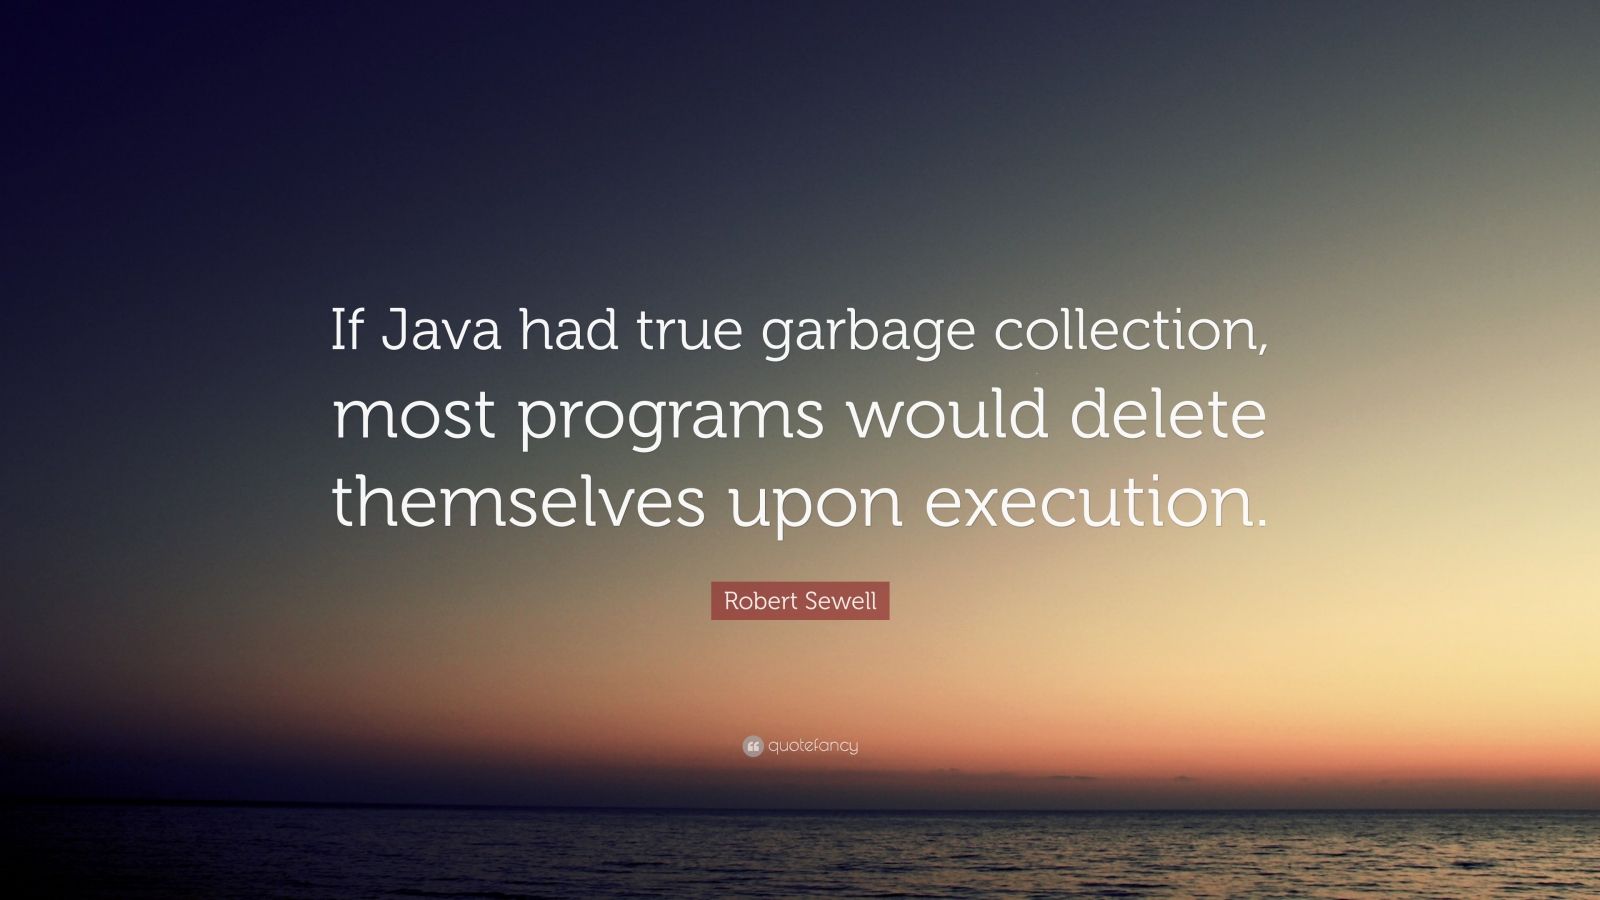 Robert Sewell Quote: “If Java had true garbage collection, most